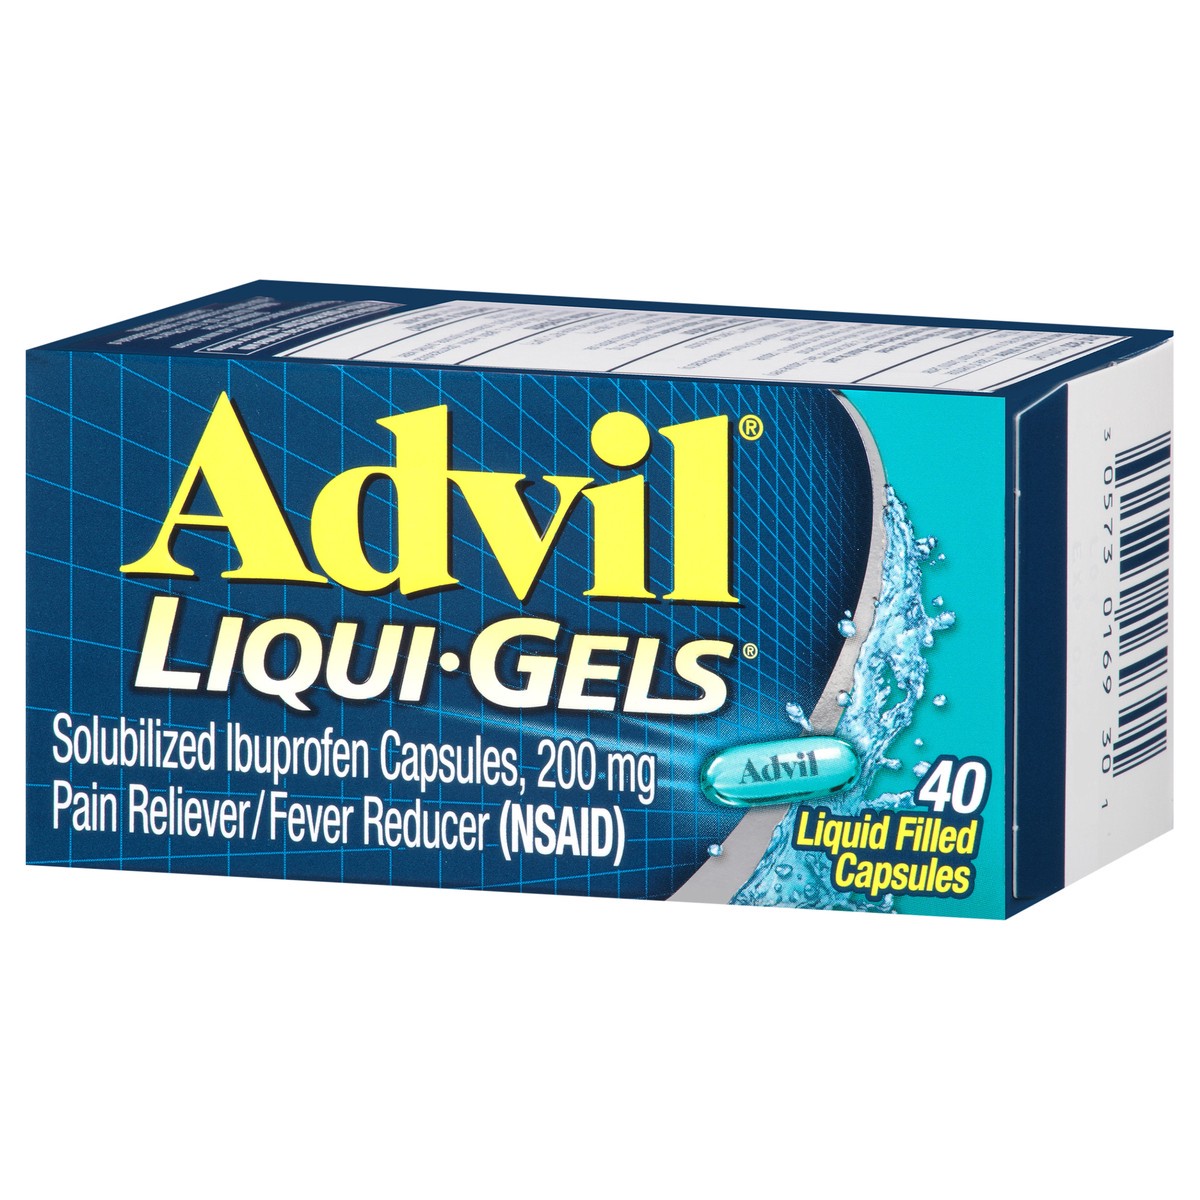 slide 3 of 9, Advil Liqui-Gels Pain Reliever and Fever Reducer, Ibuprofen 200mg for Pain Relief - 40 Liquid Filled Capsules, 40 ct